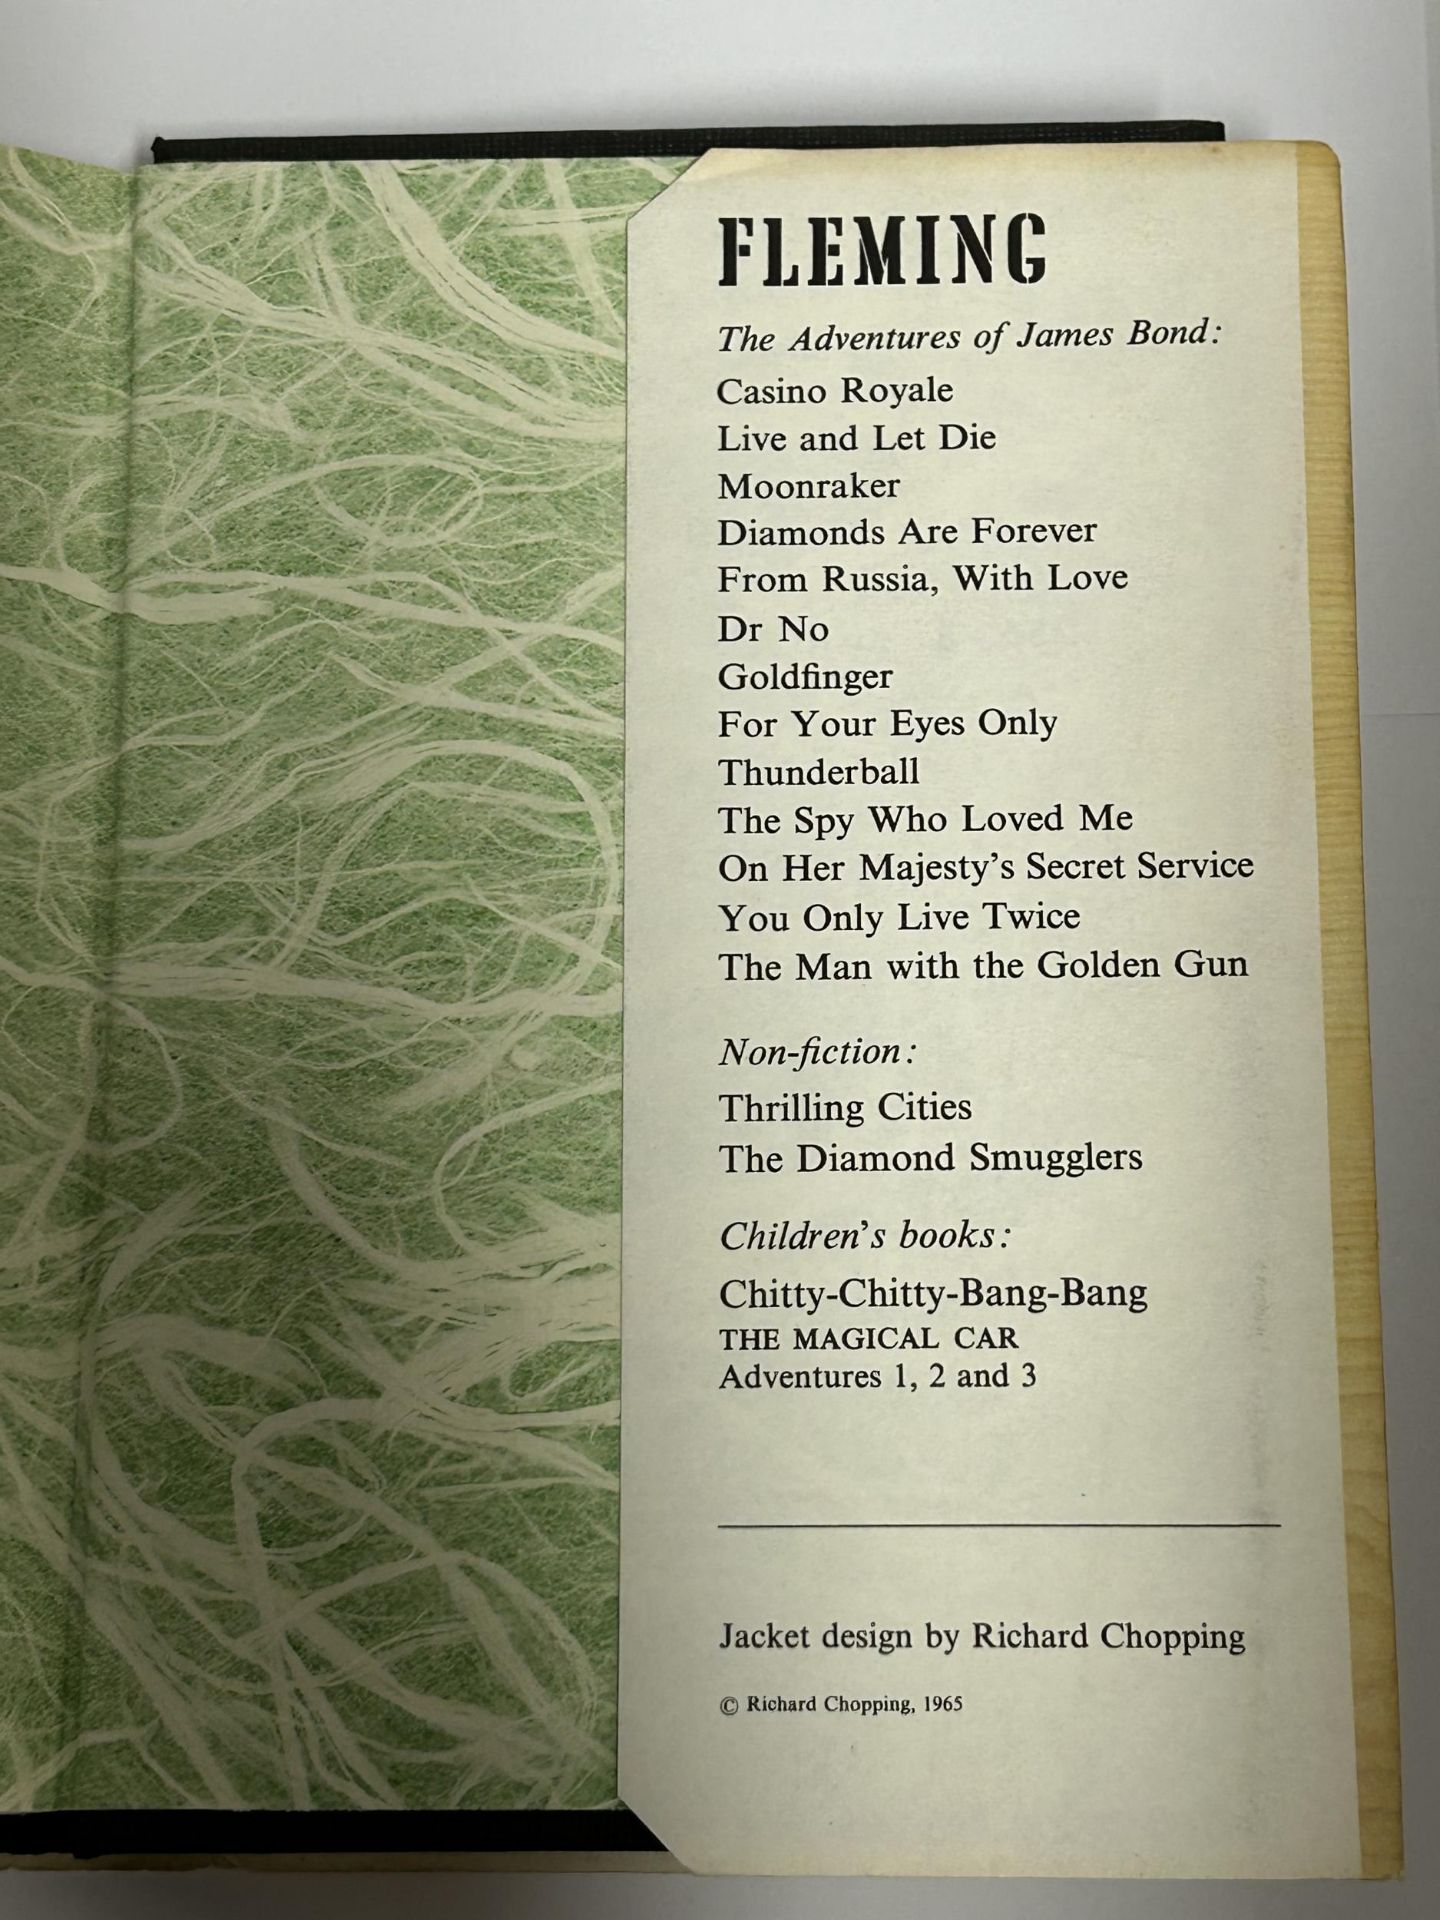 A 1965 IAN FLEMING FIRST EDITION, THE MAN WITH THE GOLDEN GUN, JAMES BOND HARDBACK BOOK COMPLETE - Image 6 of 7